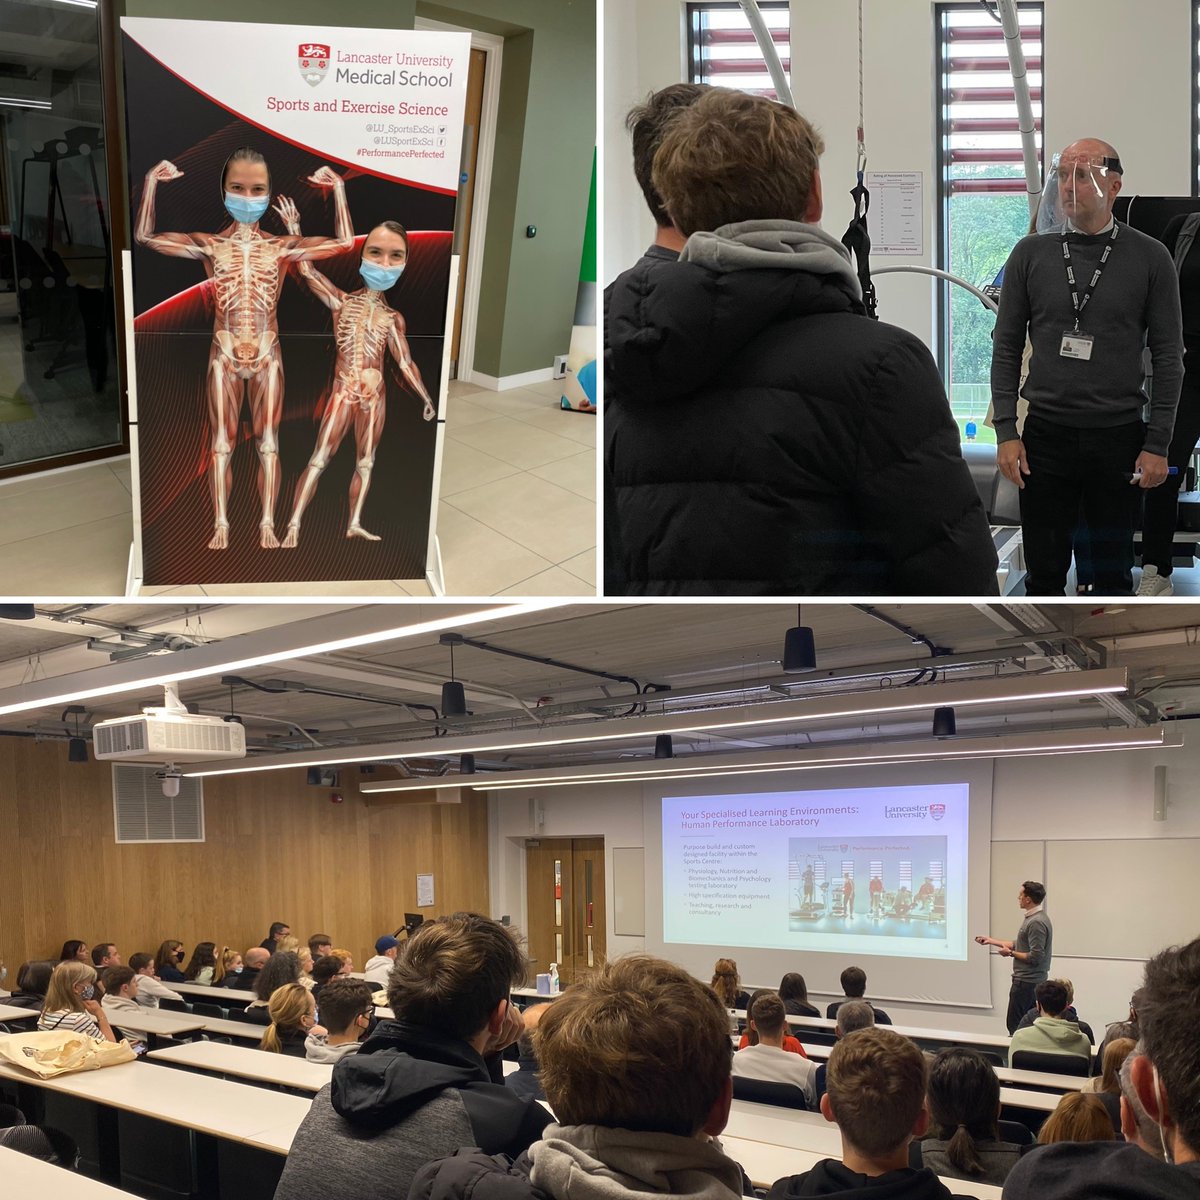 Thanks to everyone who joined us at our open day today  - we hope you enjoyed your day.

Big thanks to our superstar student ambassadors @ErinGriffiths21 @CruisePoppy @Hollygbriggs!
 
#LoveLancaster #performanceperfected @LancasterMedSch @LancasterUniFHM @LancasterUni